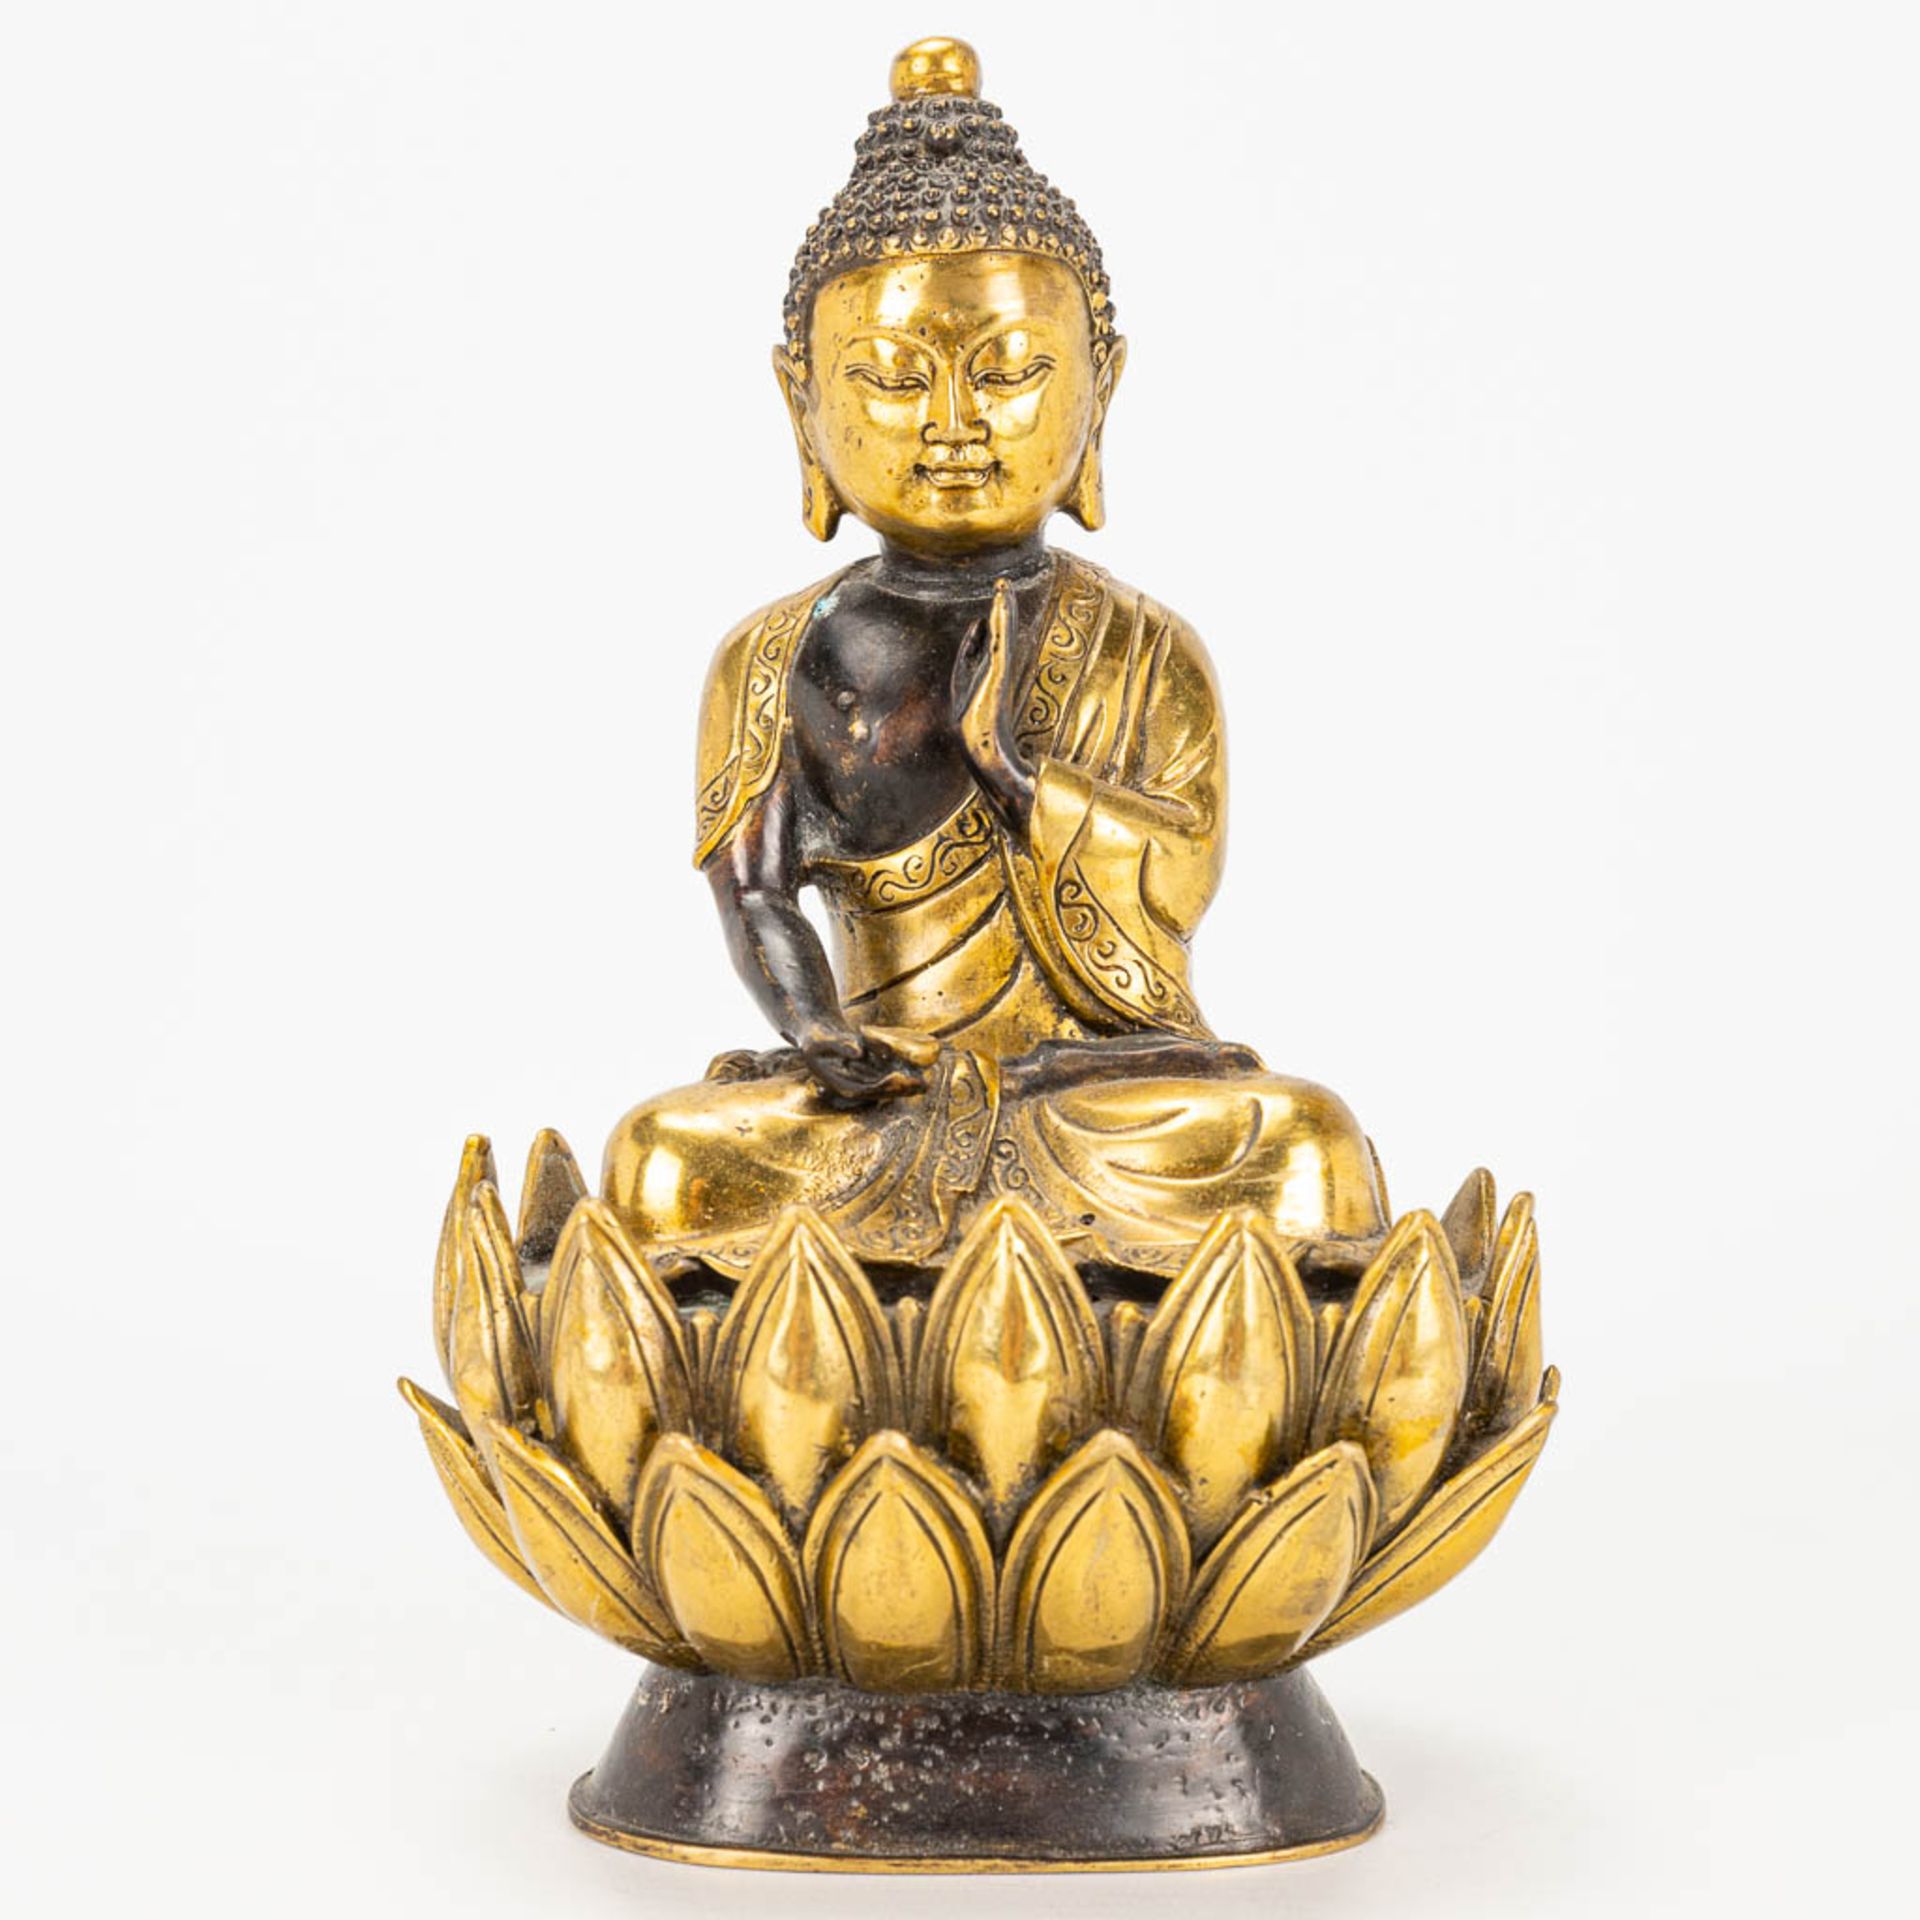 A Buddha on a lotus flower made of bronze.